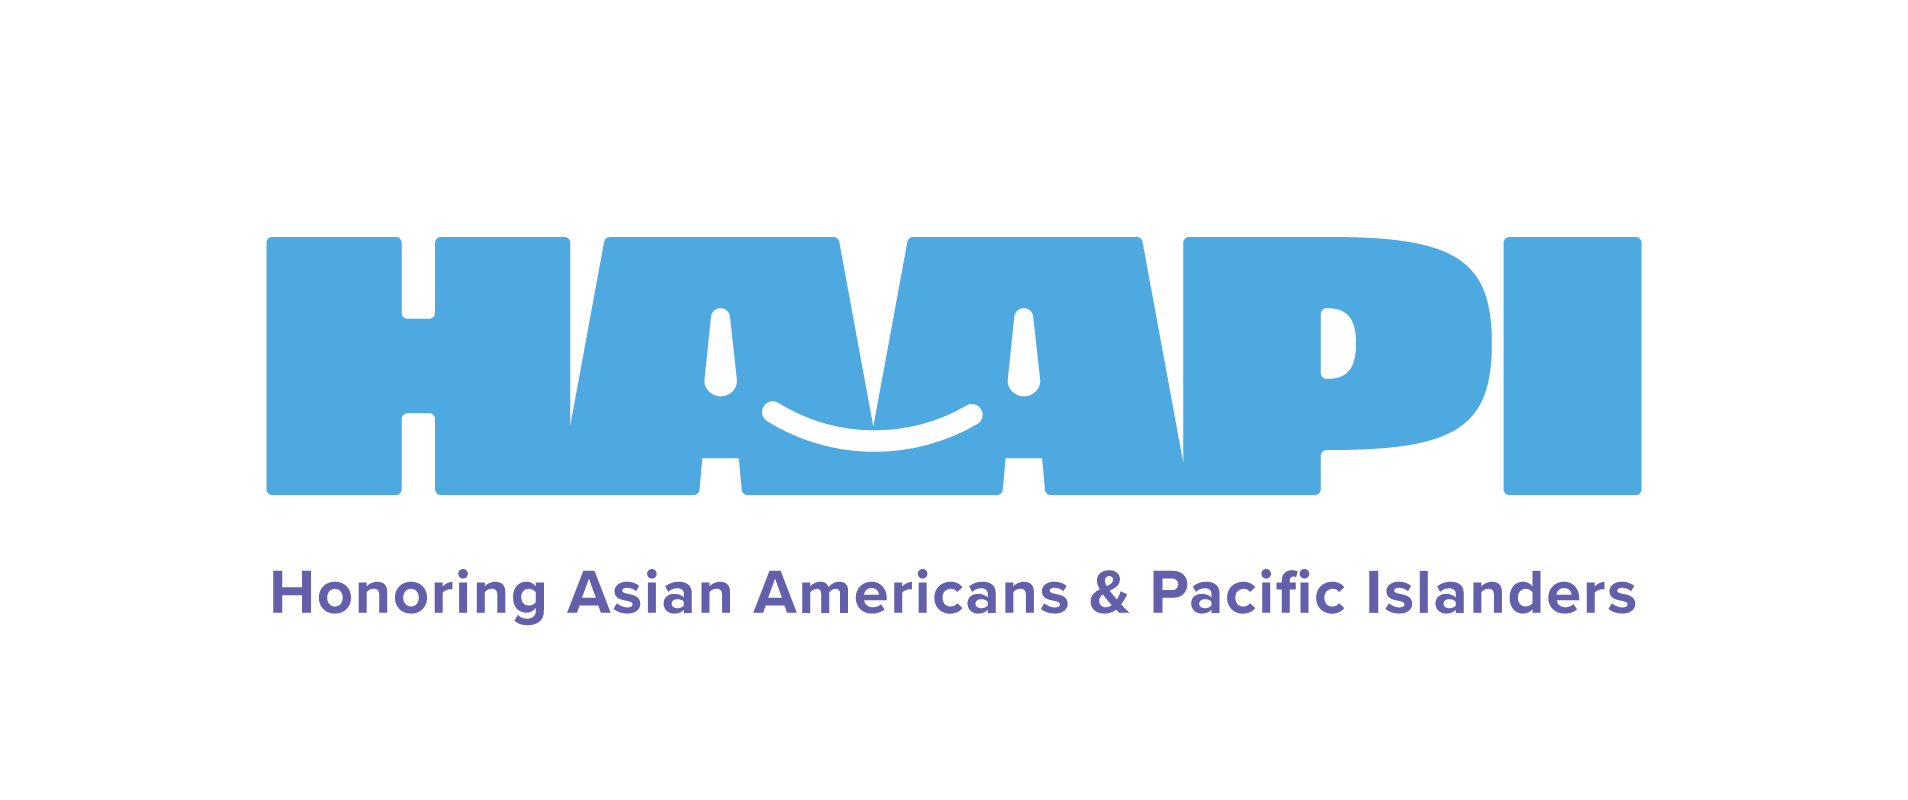 DISH Honoring Asian Americans and Pacific Islanders employee resource groups company committed to diversity